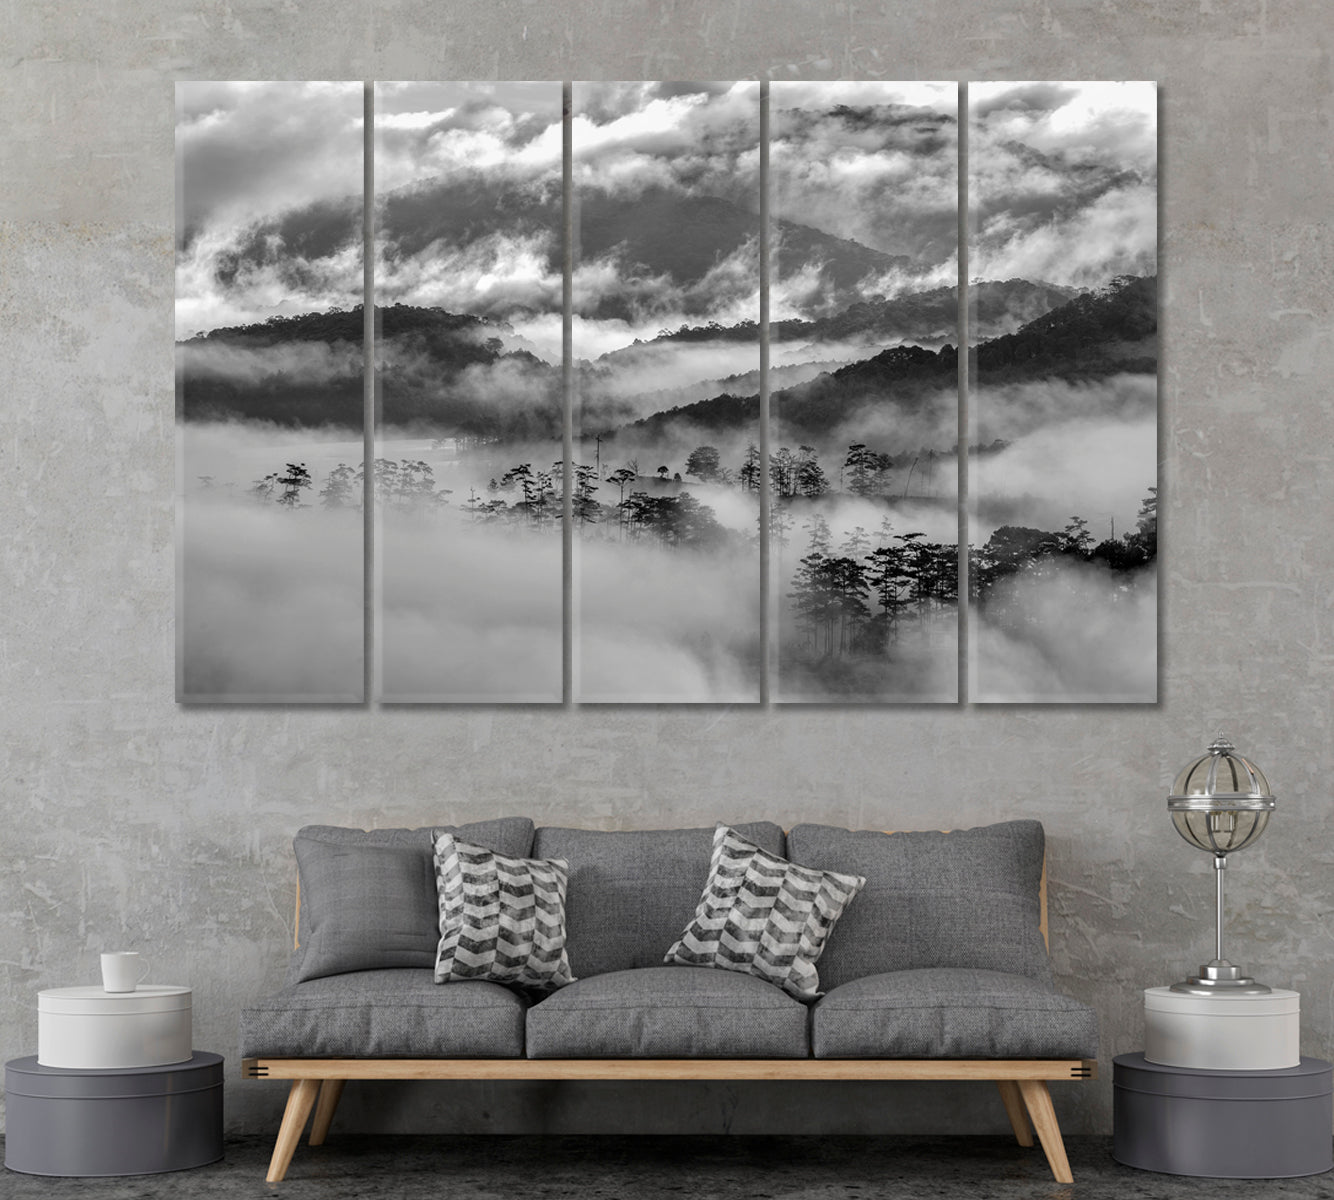 Black And White Nature Landscape Canvas Print ArtLexy 5 Panels 36"x24" inches 